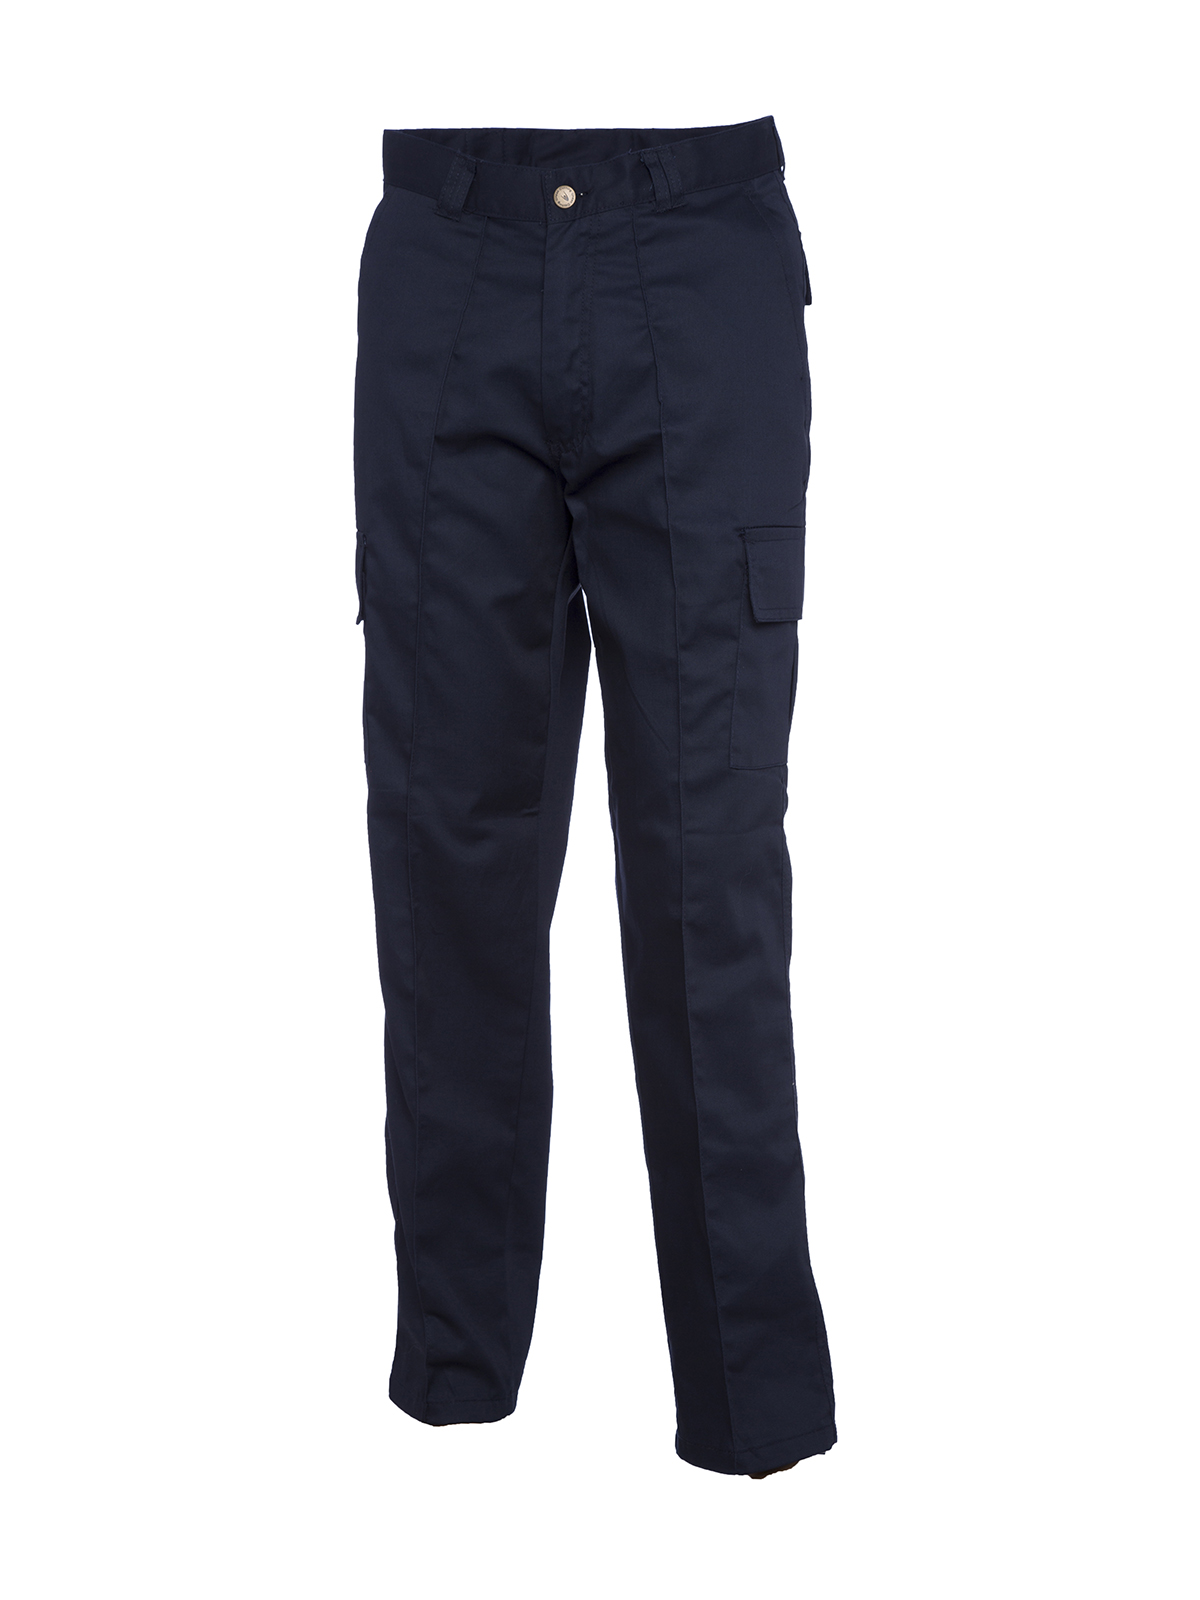 Cargo Trousers, Navy Blue - 28R